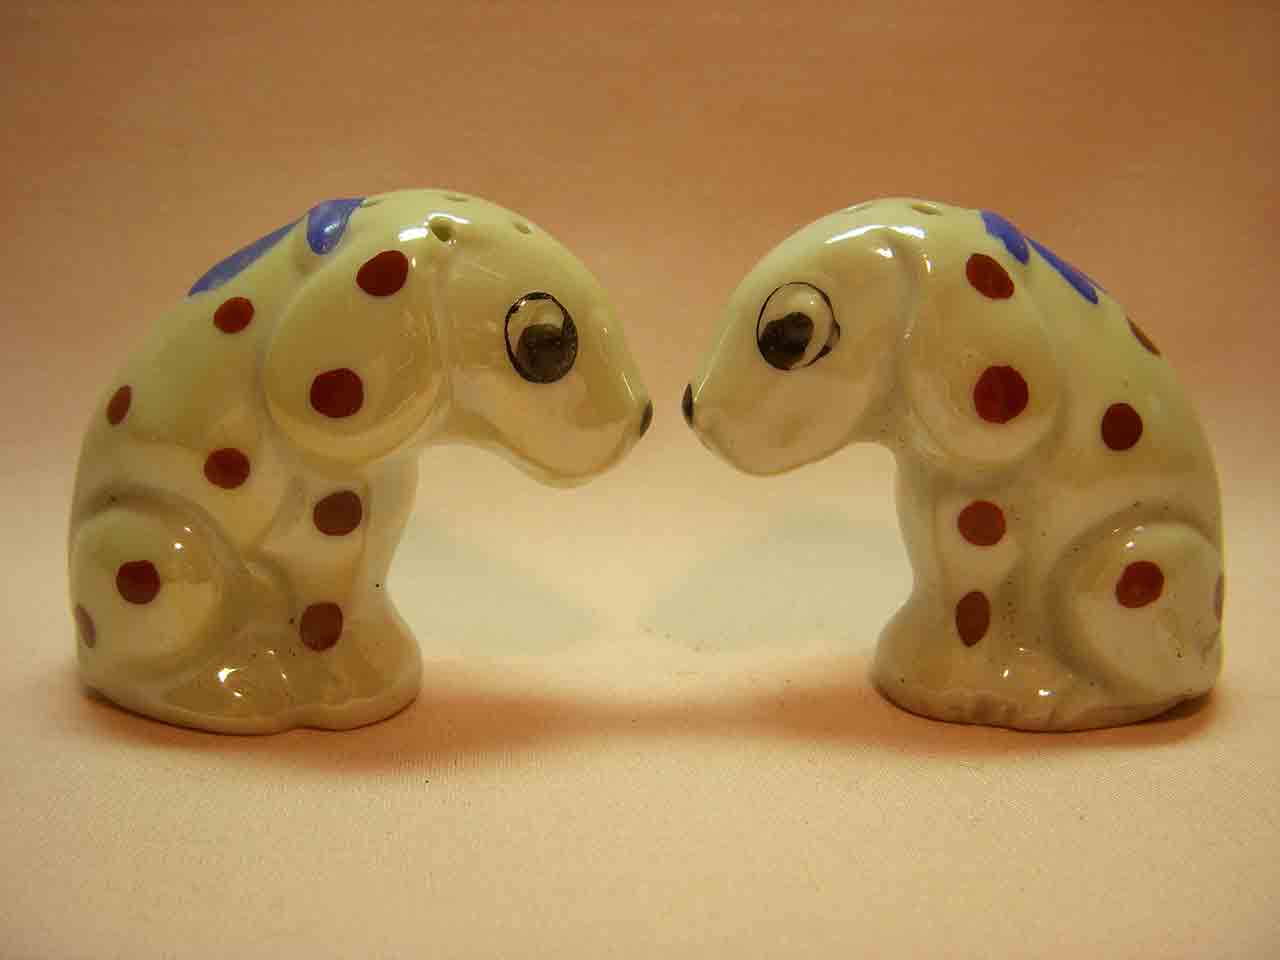 Dismal Desmond dogs from Germany salt and pepper shakers